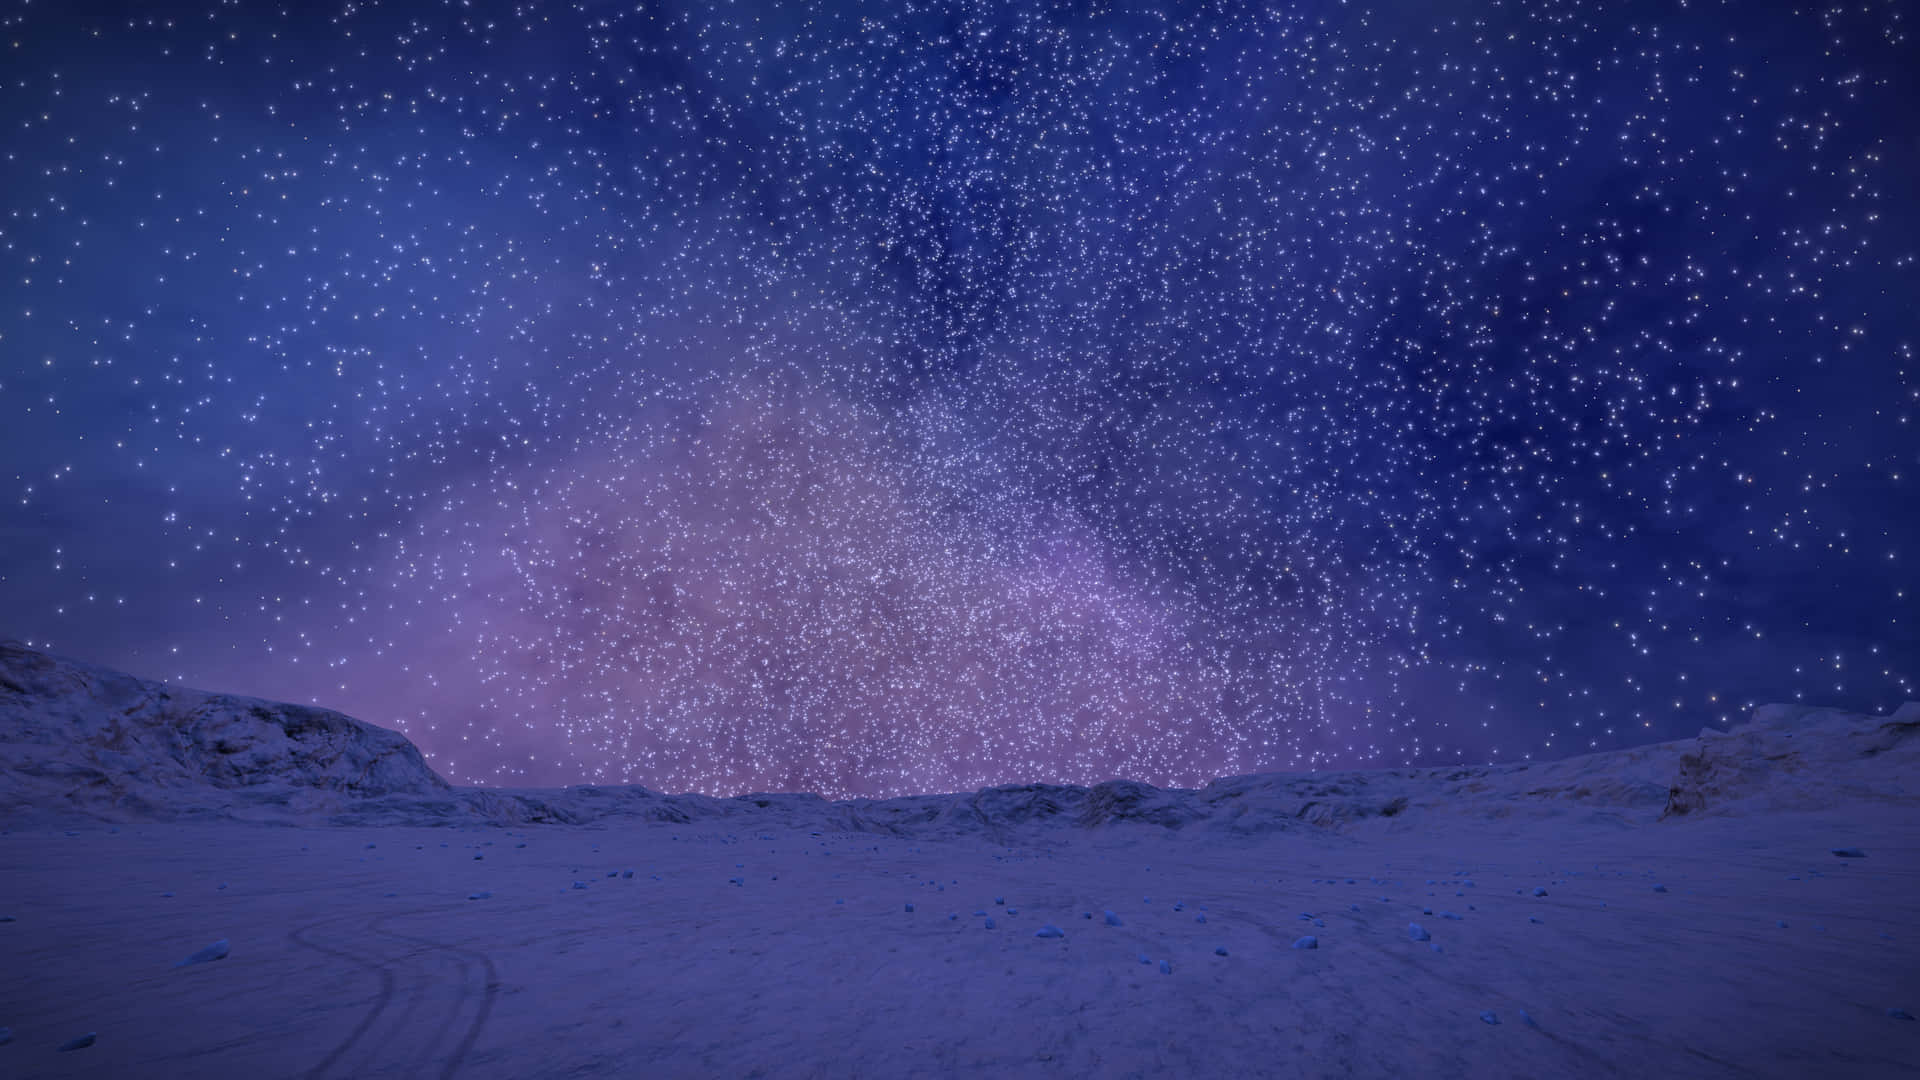 Captivating Chilly Night under Starry Skies Wallpaper